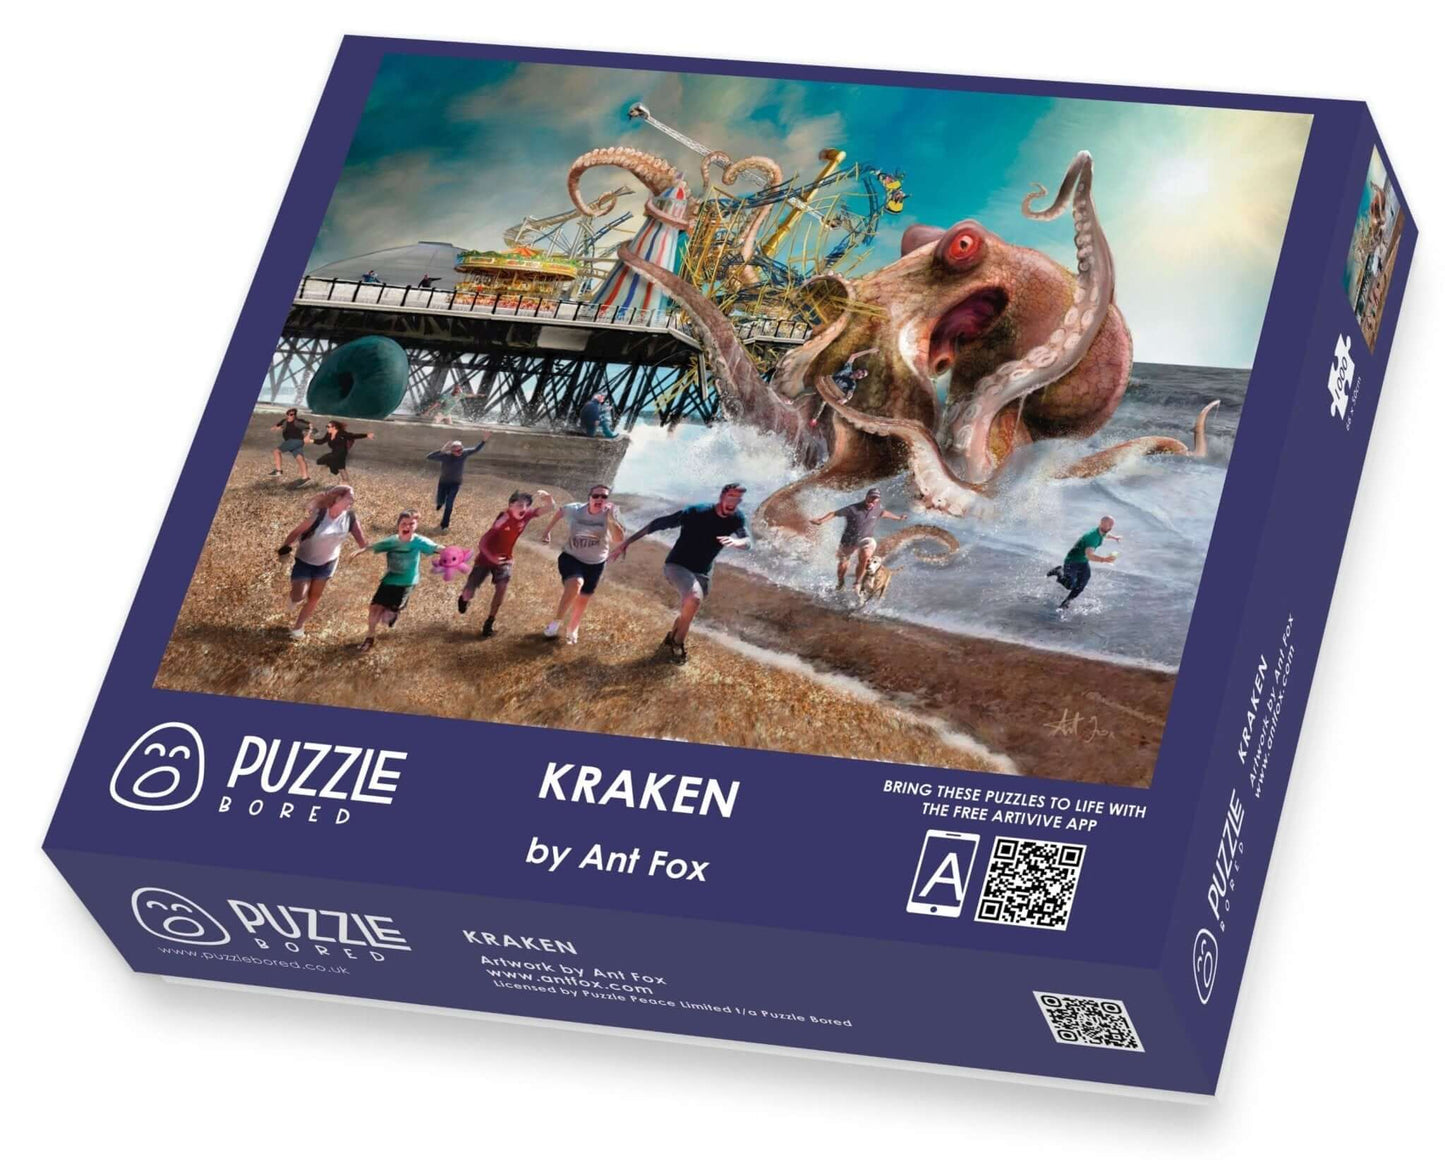 Kraken by Ant Fox - AR - Puzzle Bored